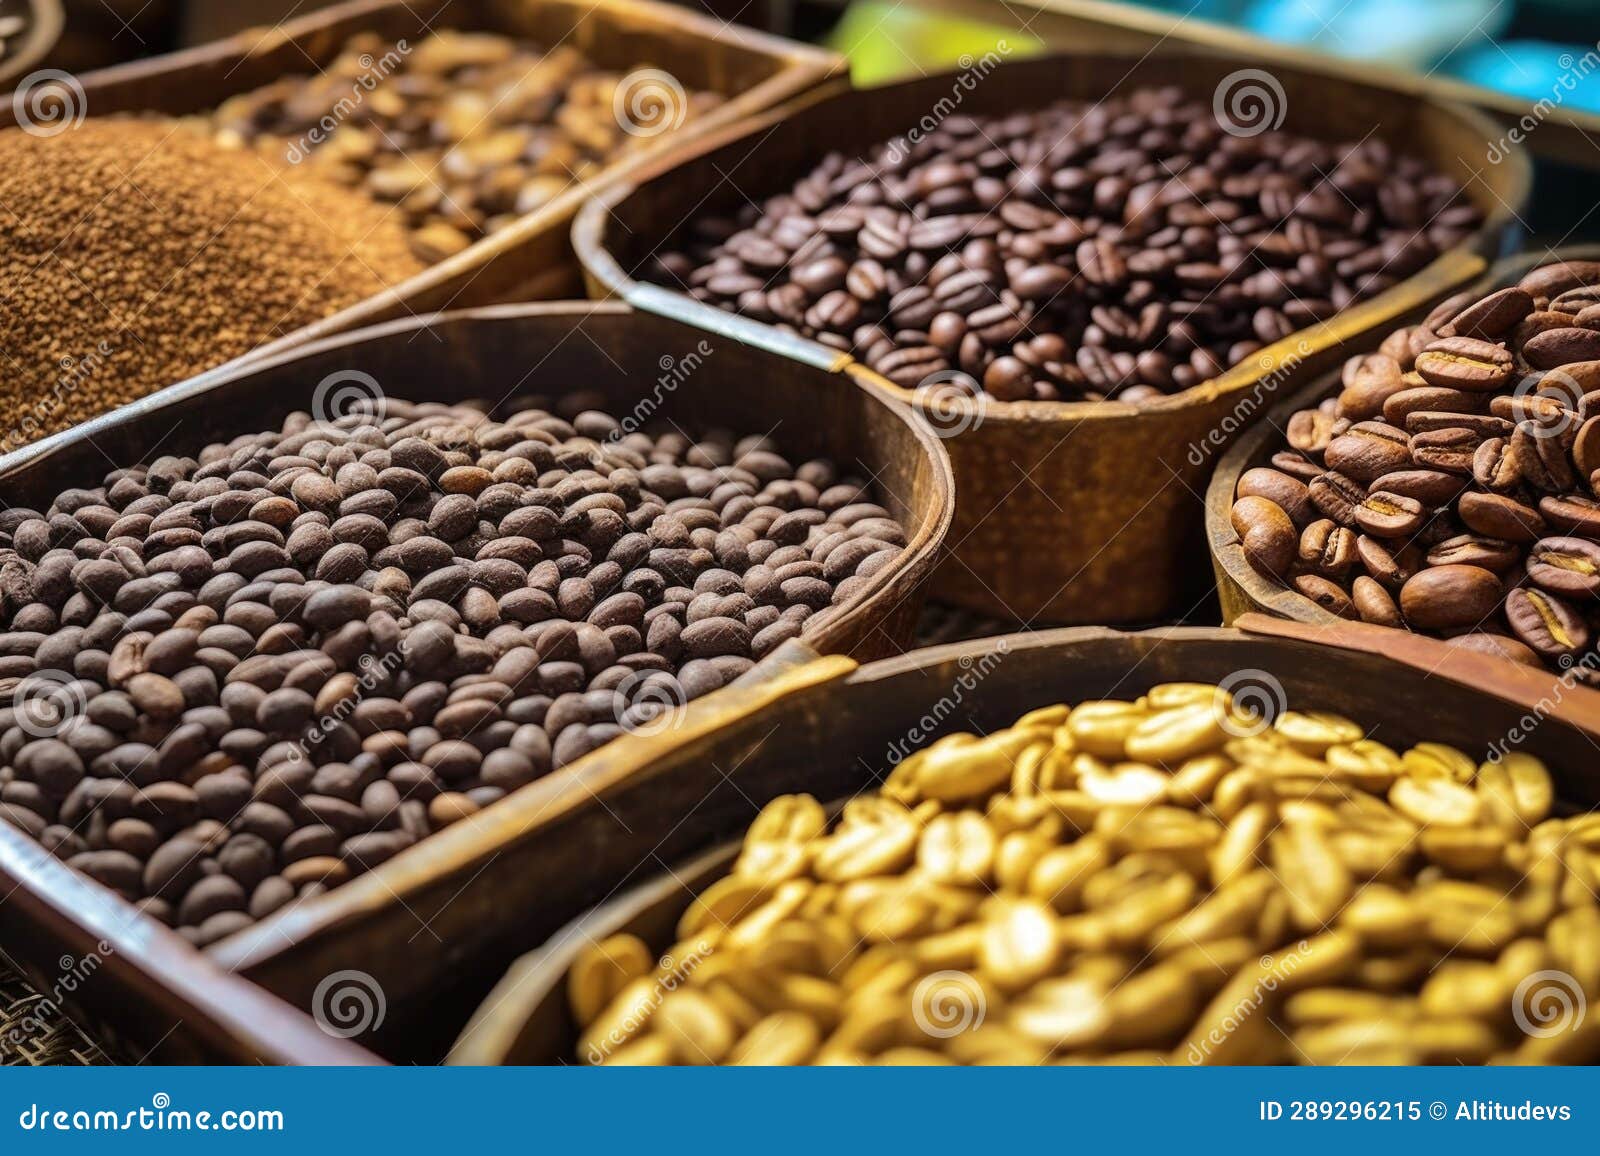 Close-up of Coffee Beans in Different Stages of Roasting Stock Image ...